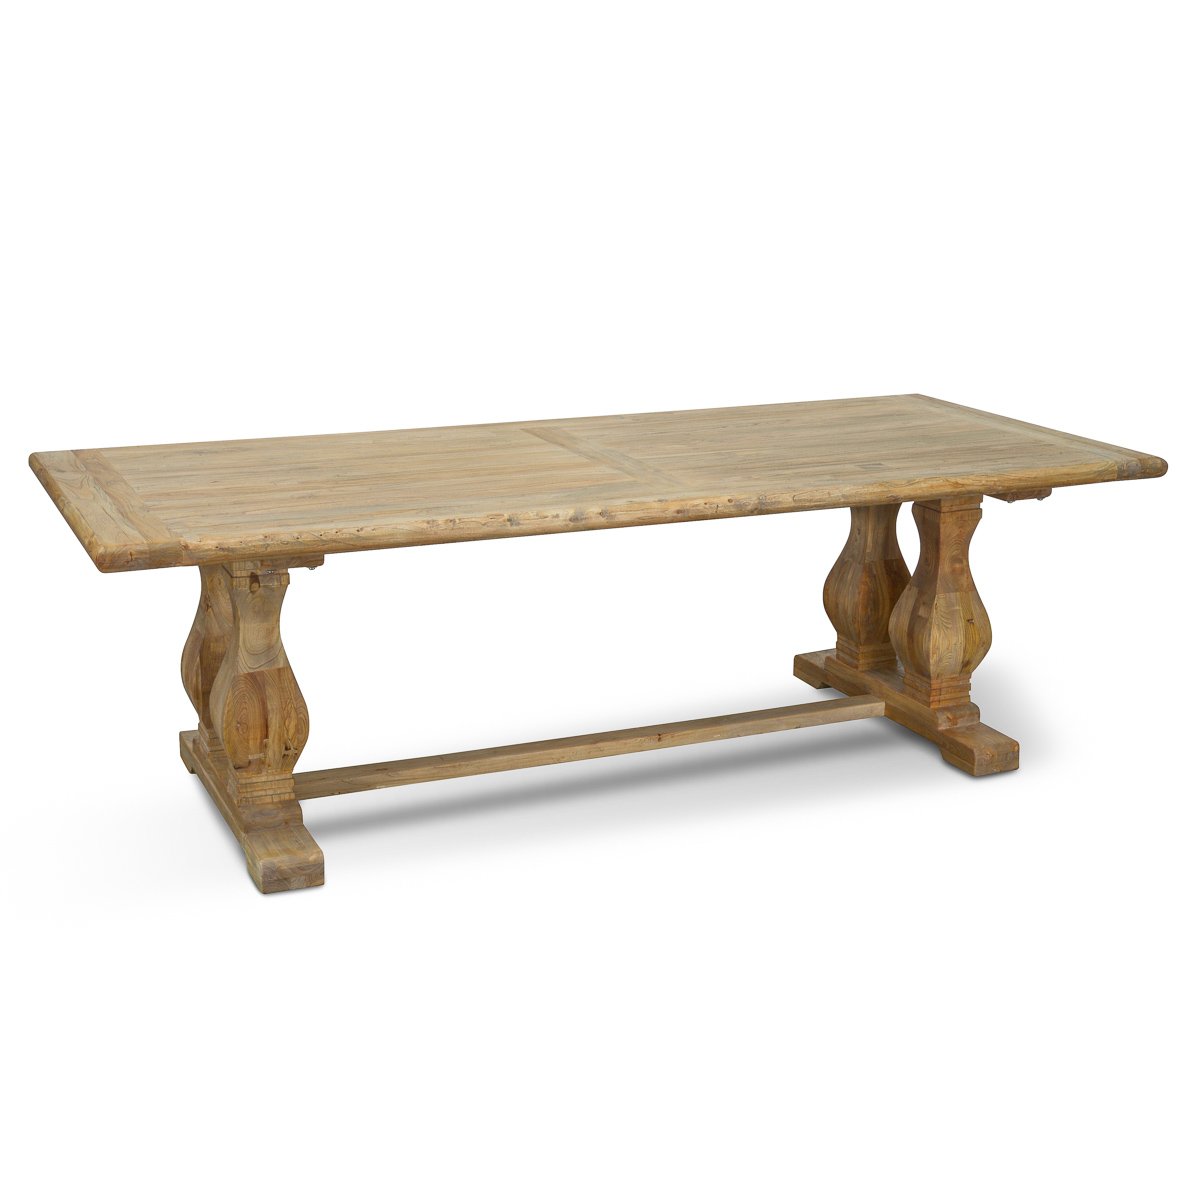 Quinn Wood Dining Table 2.4m - Rustic Natural